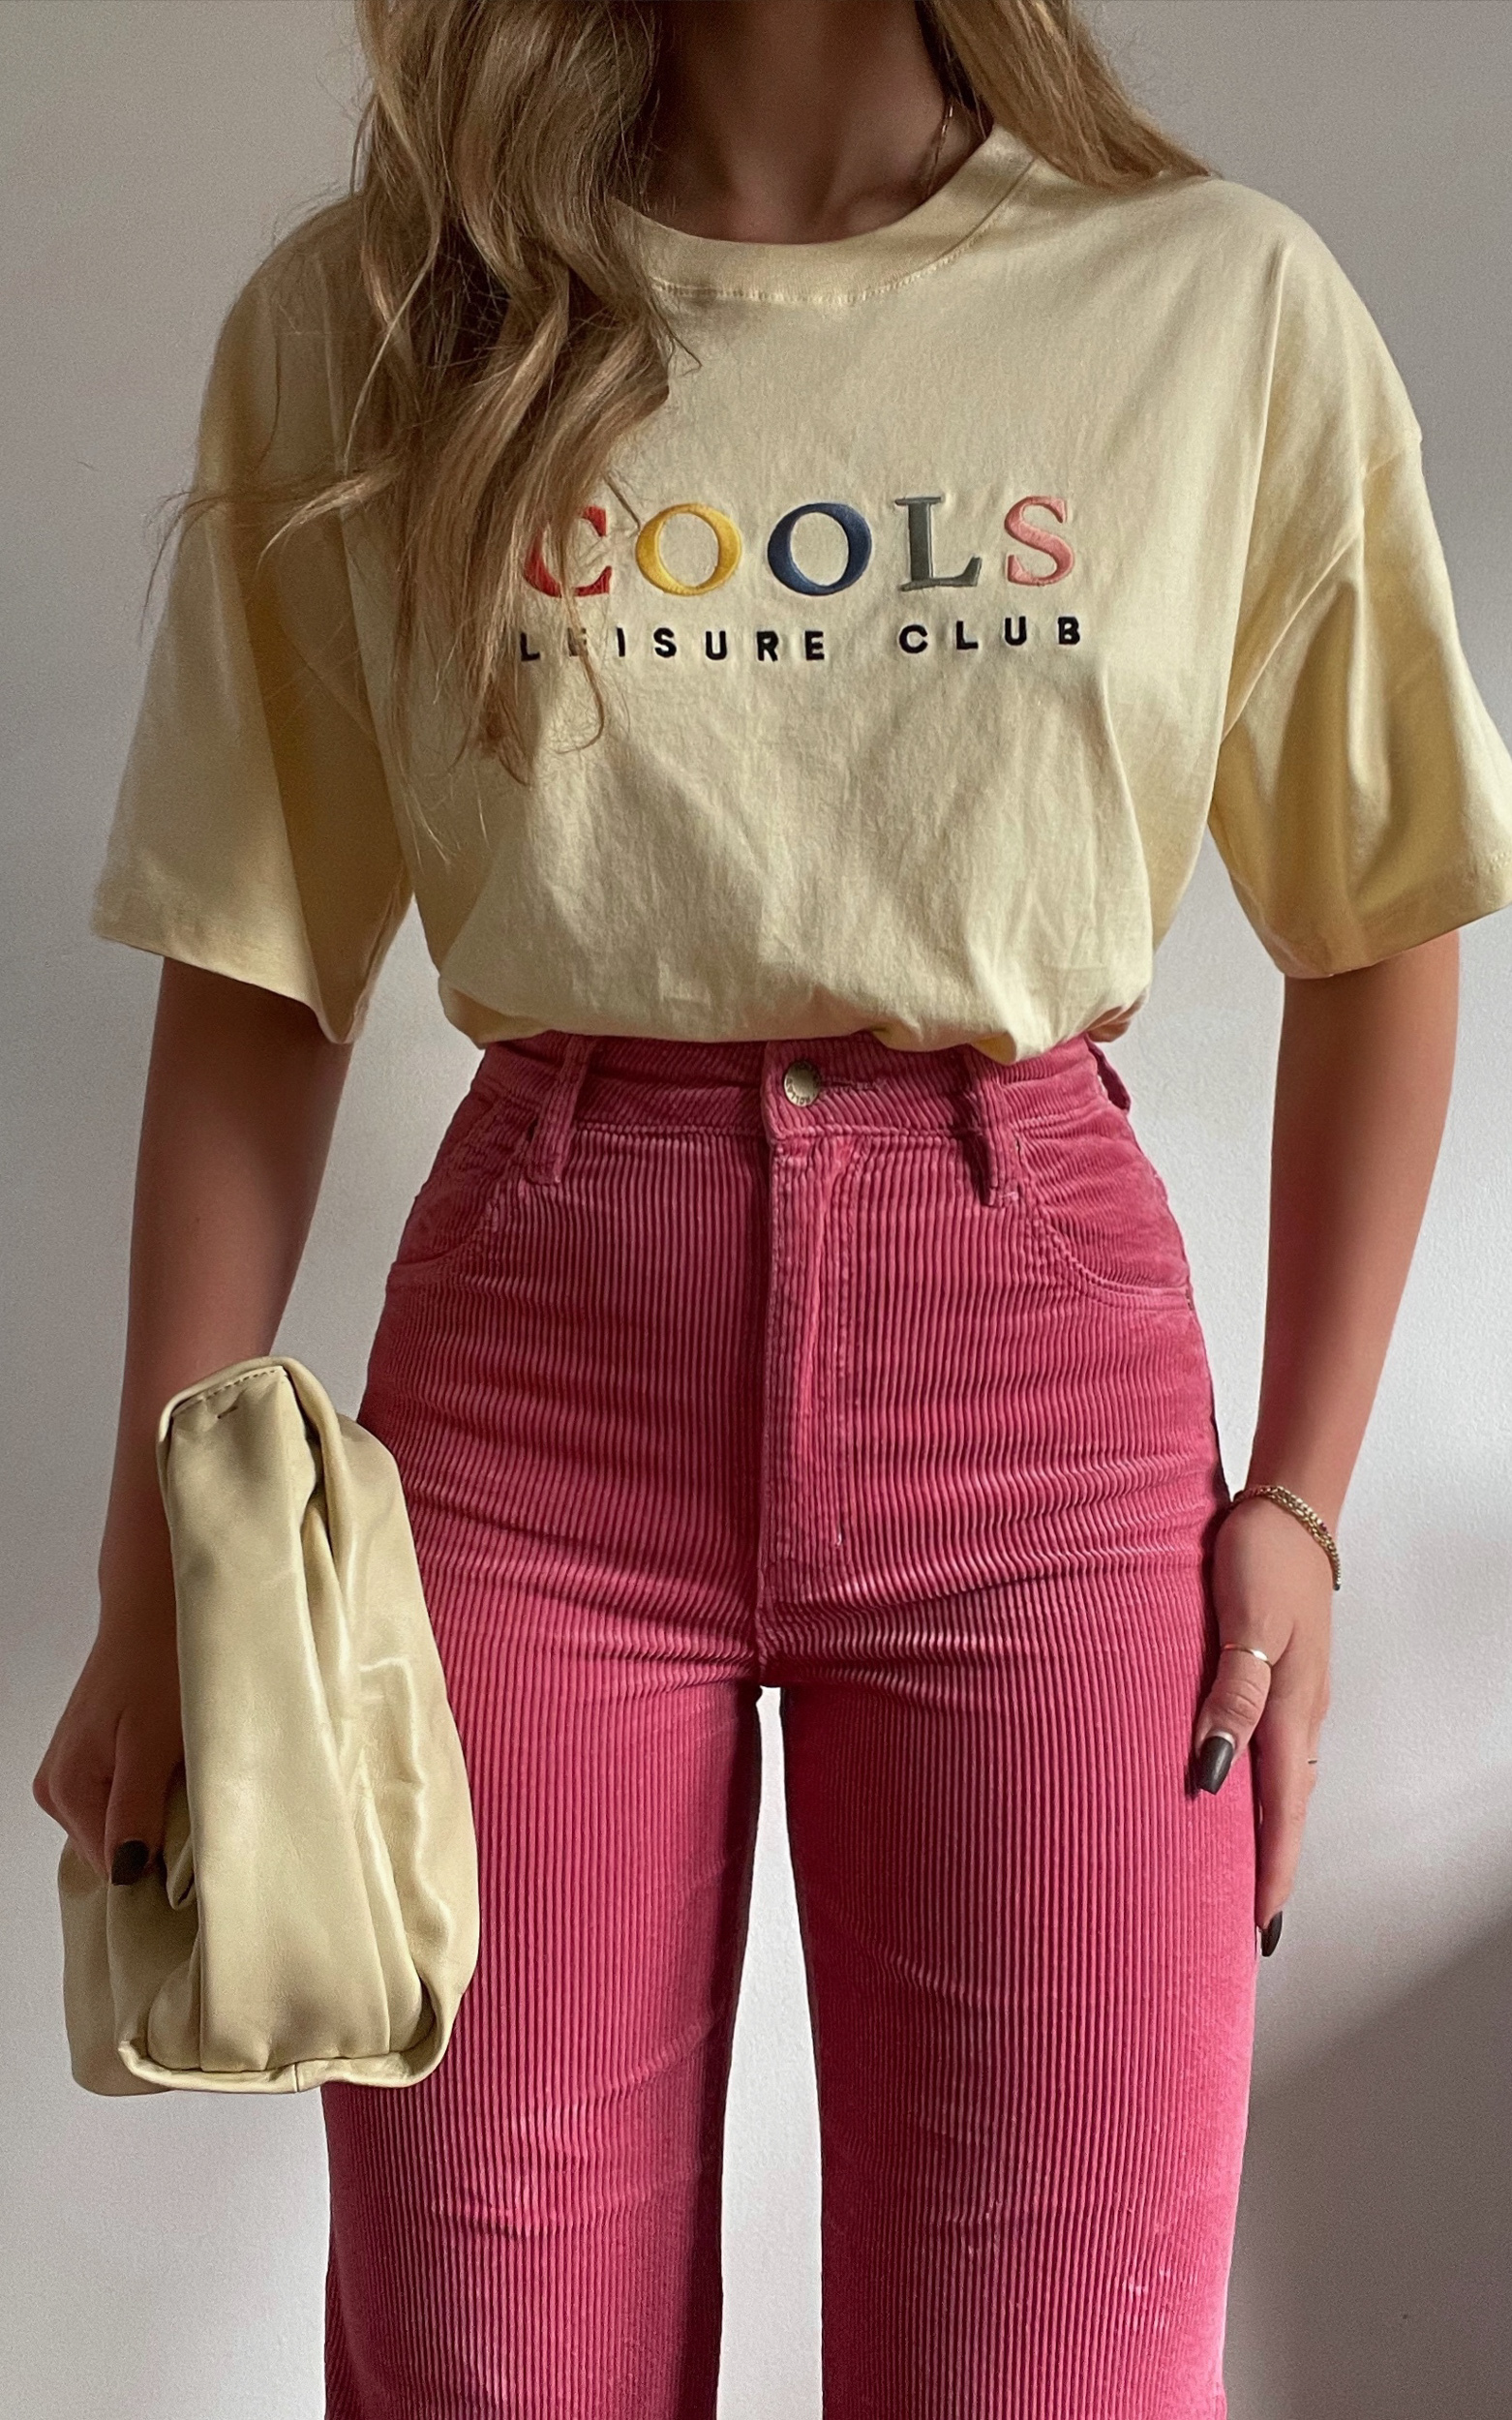 Cools Club - Leisure Club Boxy Tee in Lemon - 10, YEL1, hi-res image number null